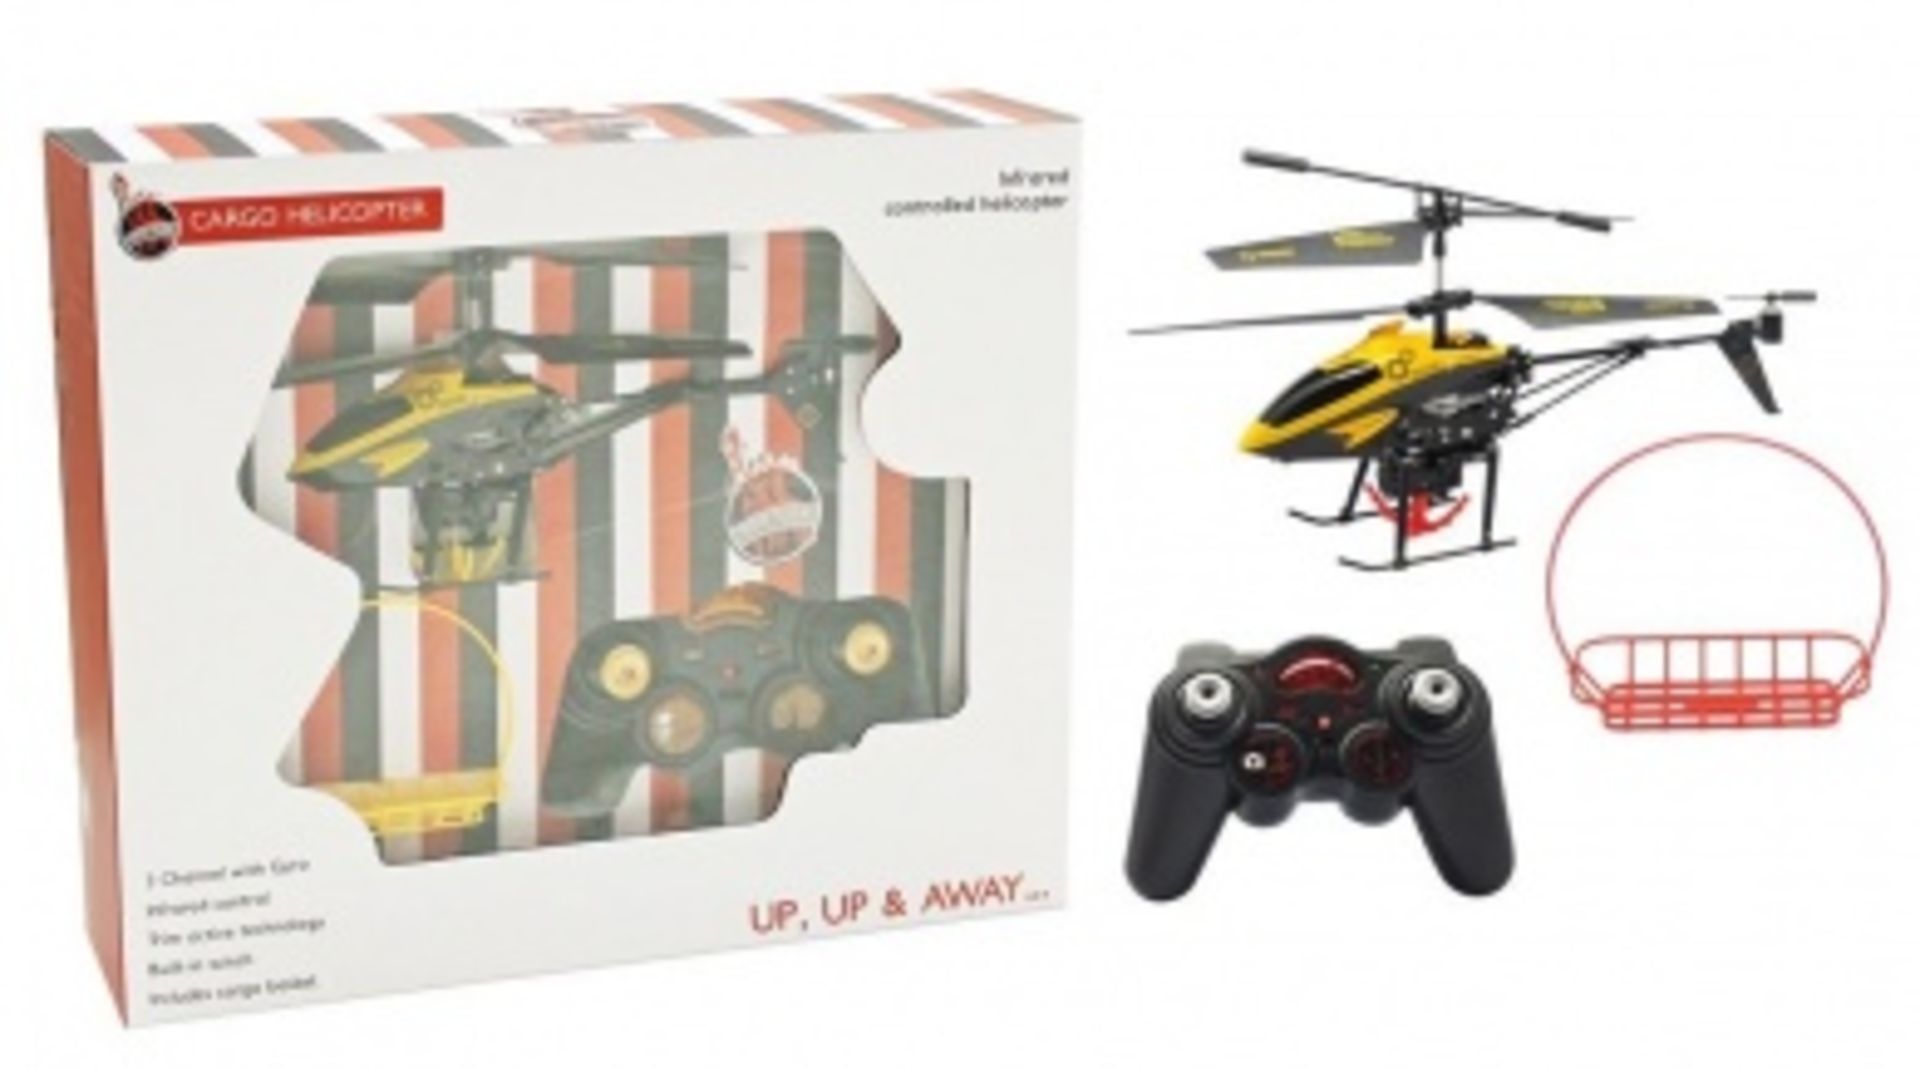 V Infrared controlled Cargo Helicopter RRP £79.99 With 3-channel gyro and trim active technology. - Image 2 of 6